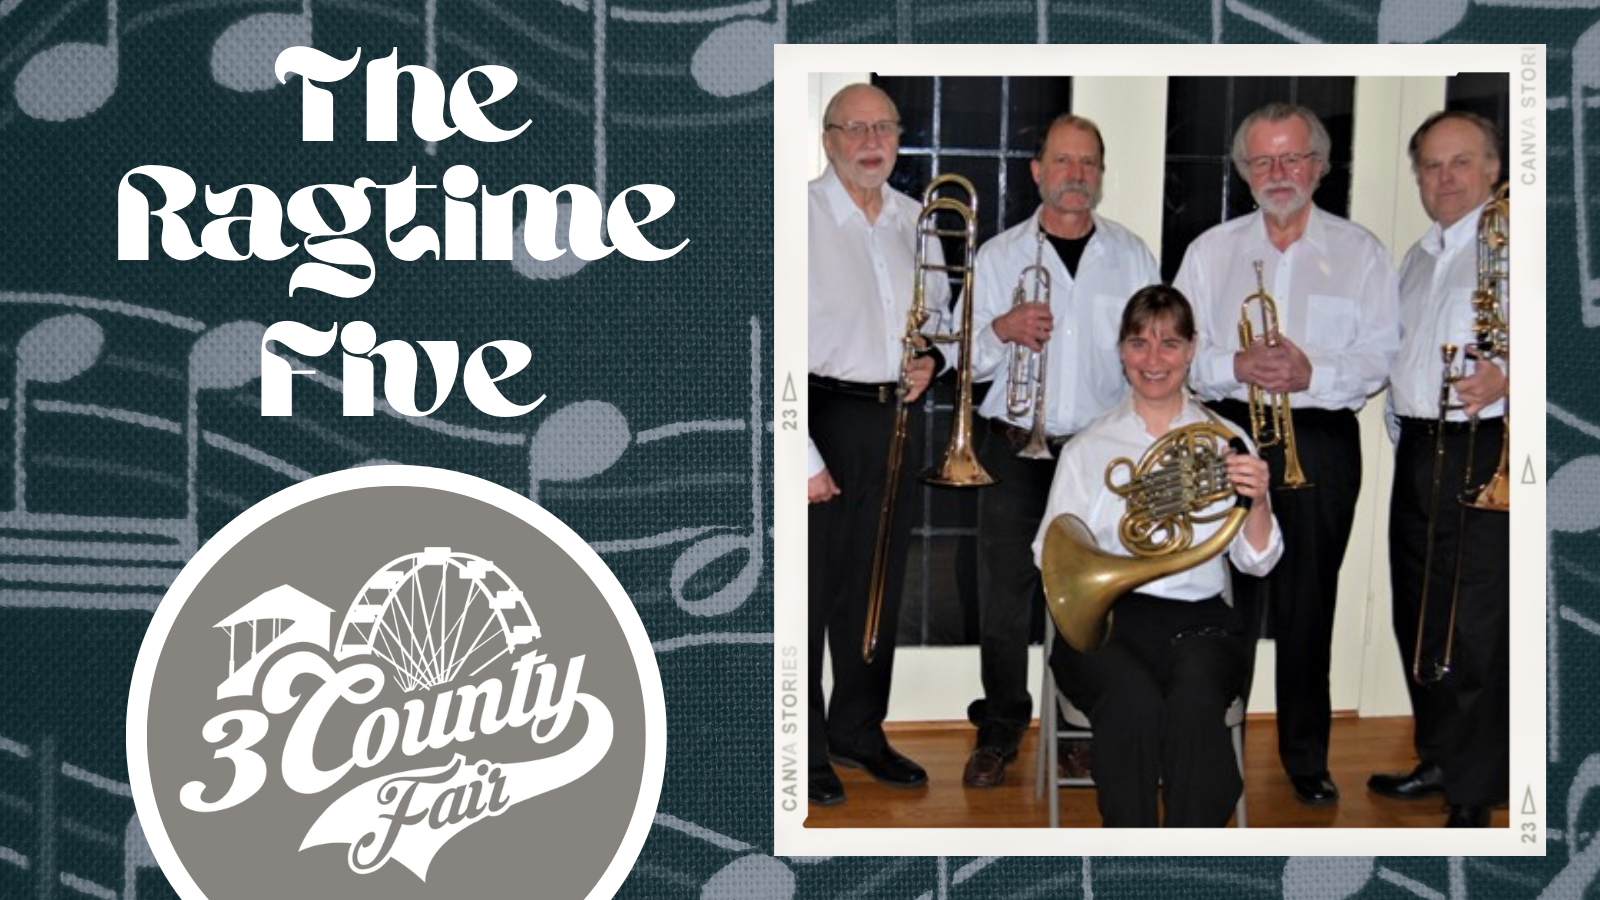 The Ragtime Five